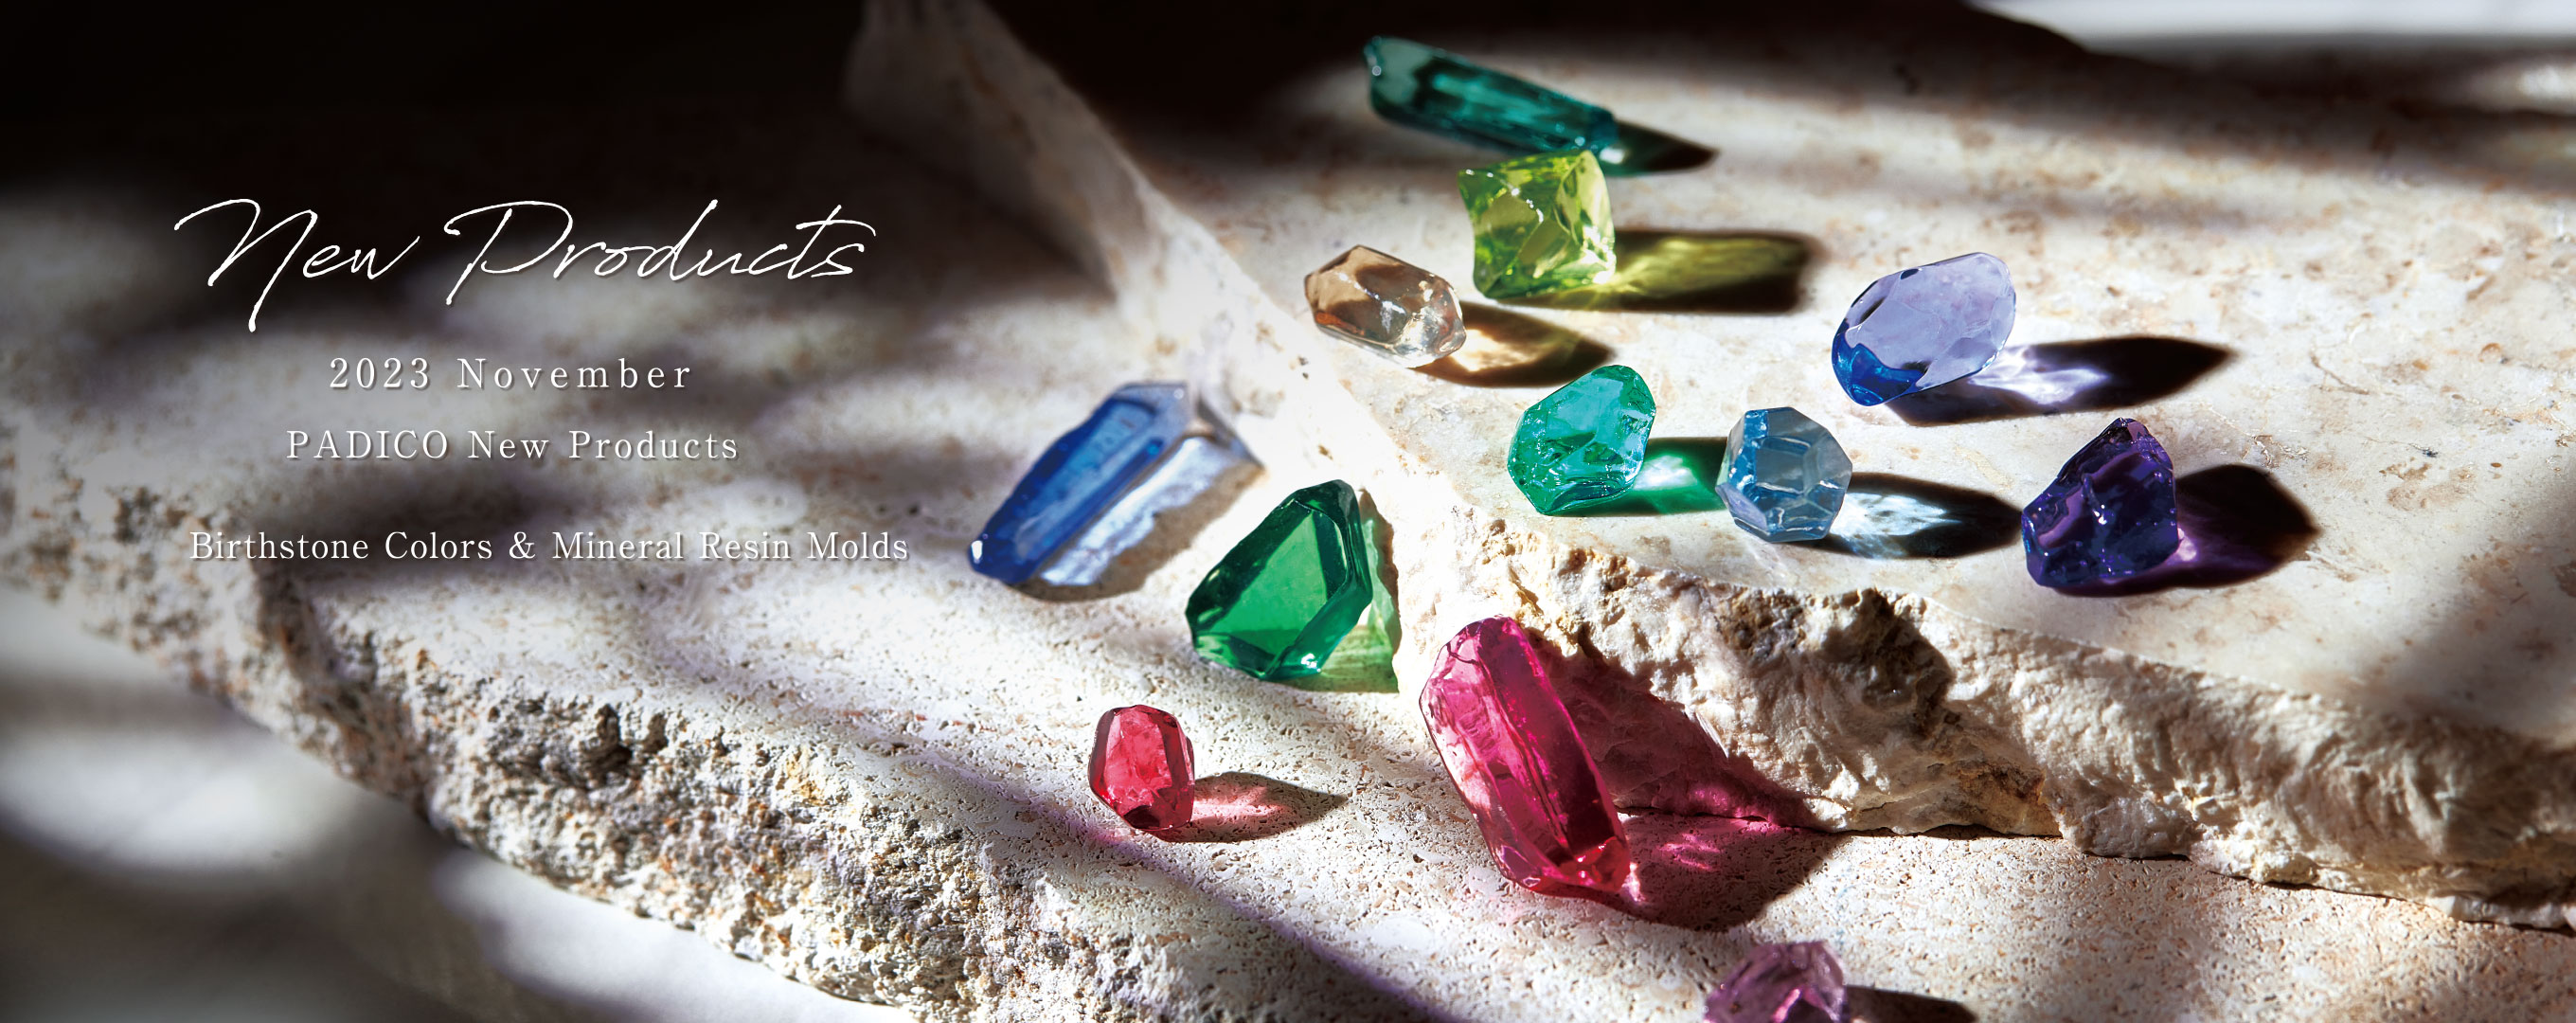 New Products 2023 November PADICO New Products Birthstone Colors & Mineral Resin Molds